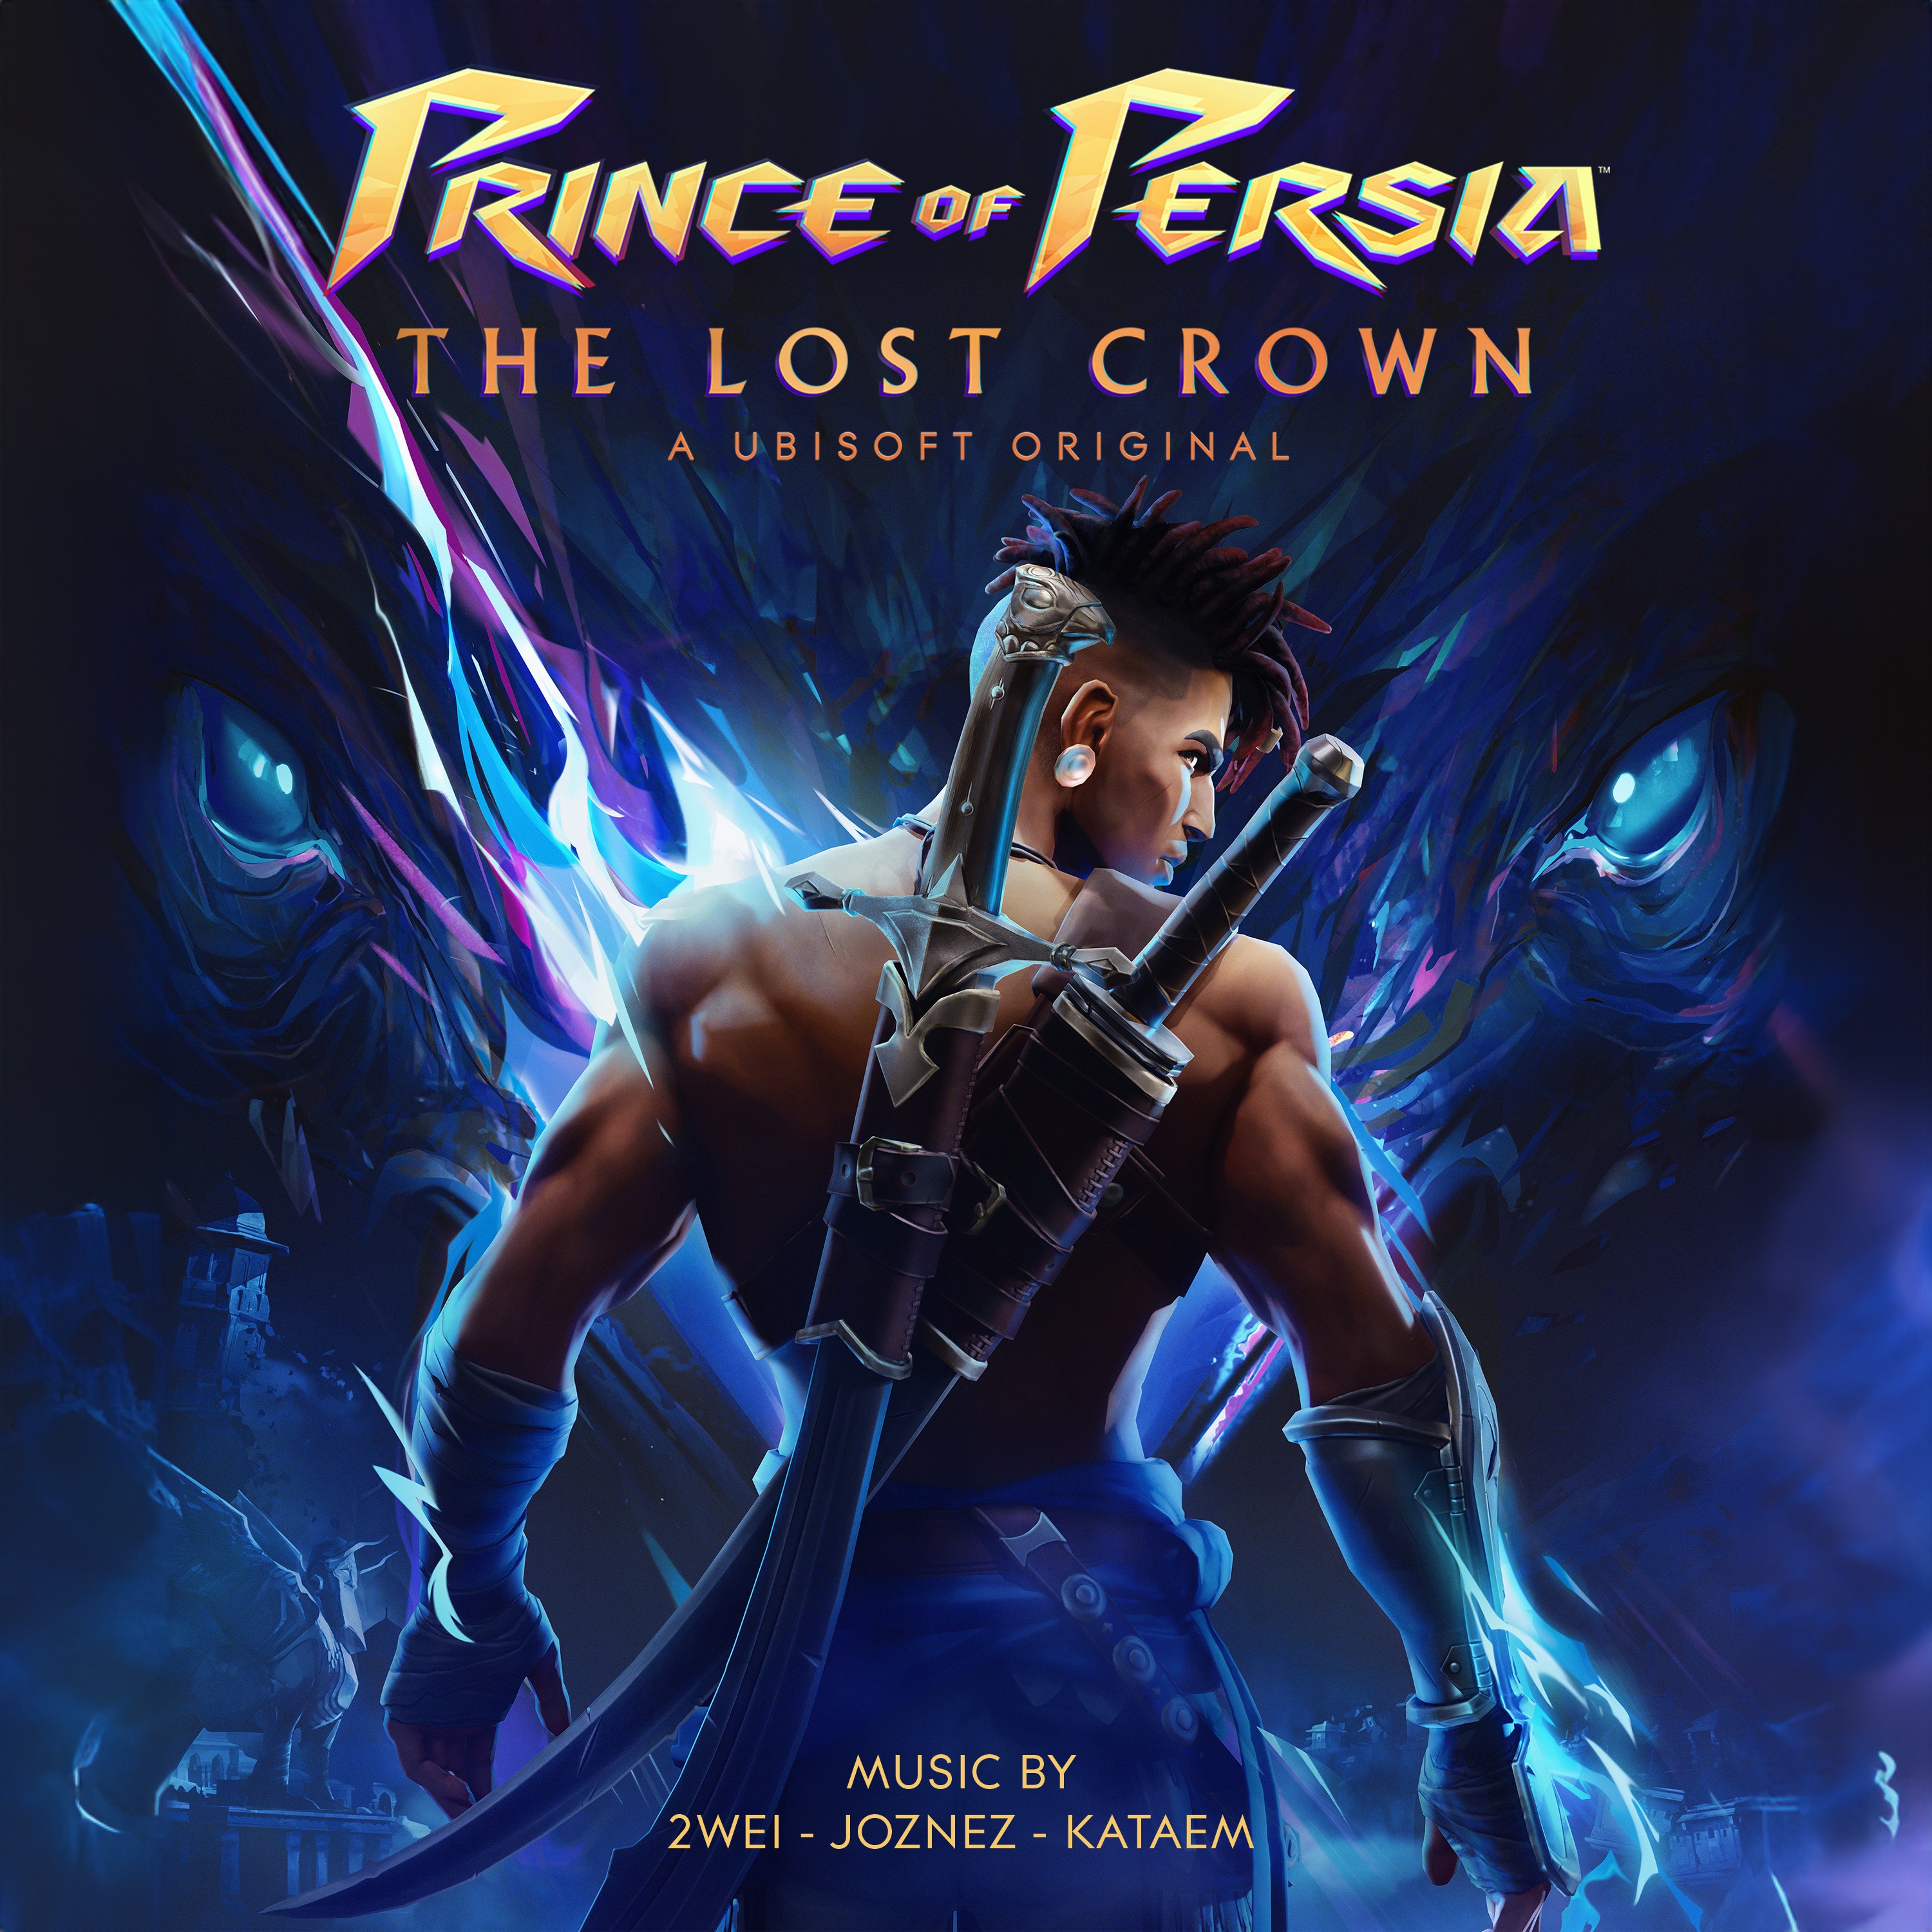 Prince of persia lost crown switch nintendo. Prince of Percia the Lost Crown. Prince of Persia the Lost Crown. Принц Персии лост Краун. Prince of Persia the Lost Crown принц.